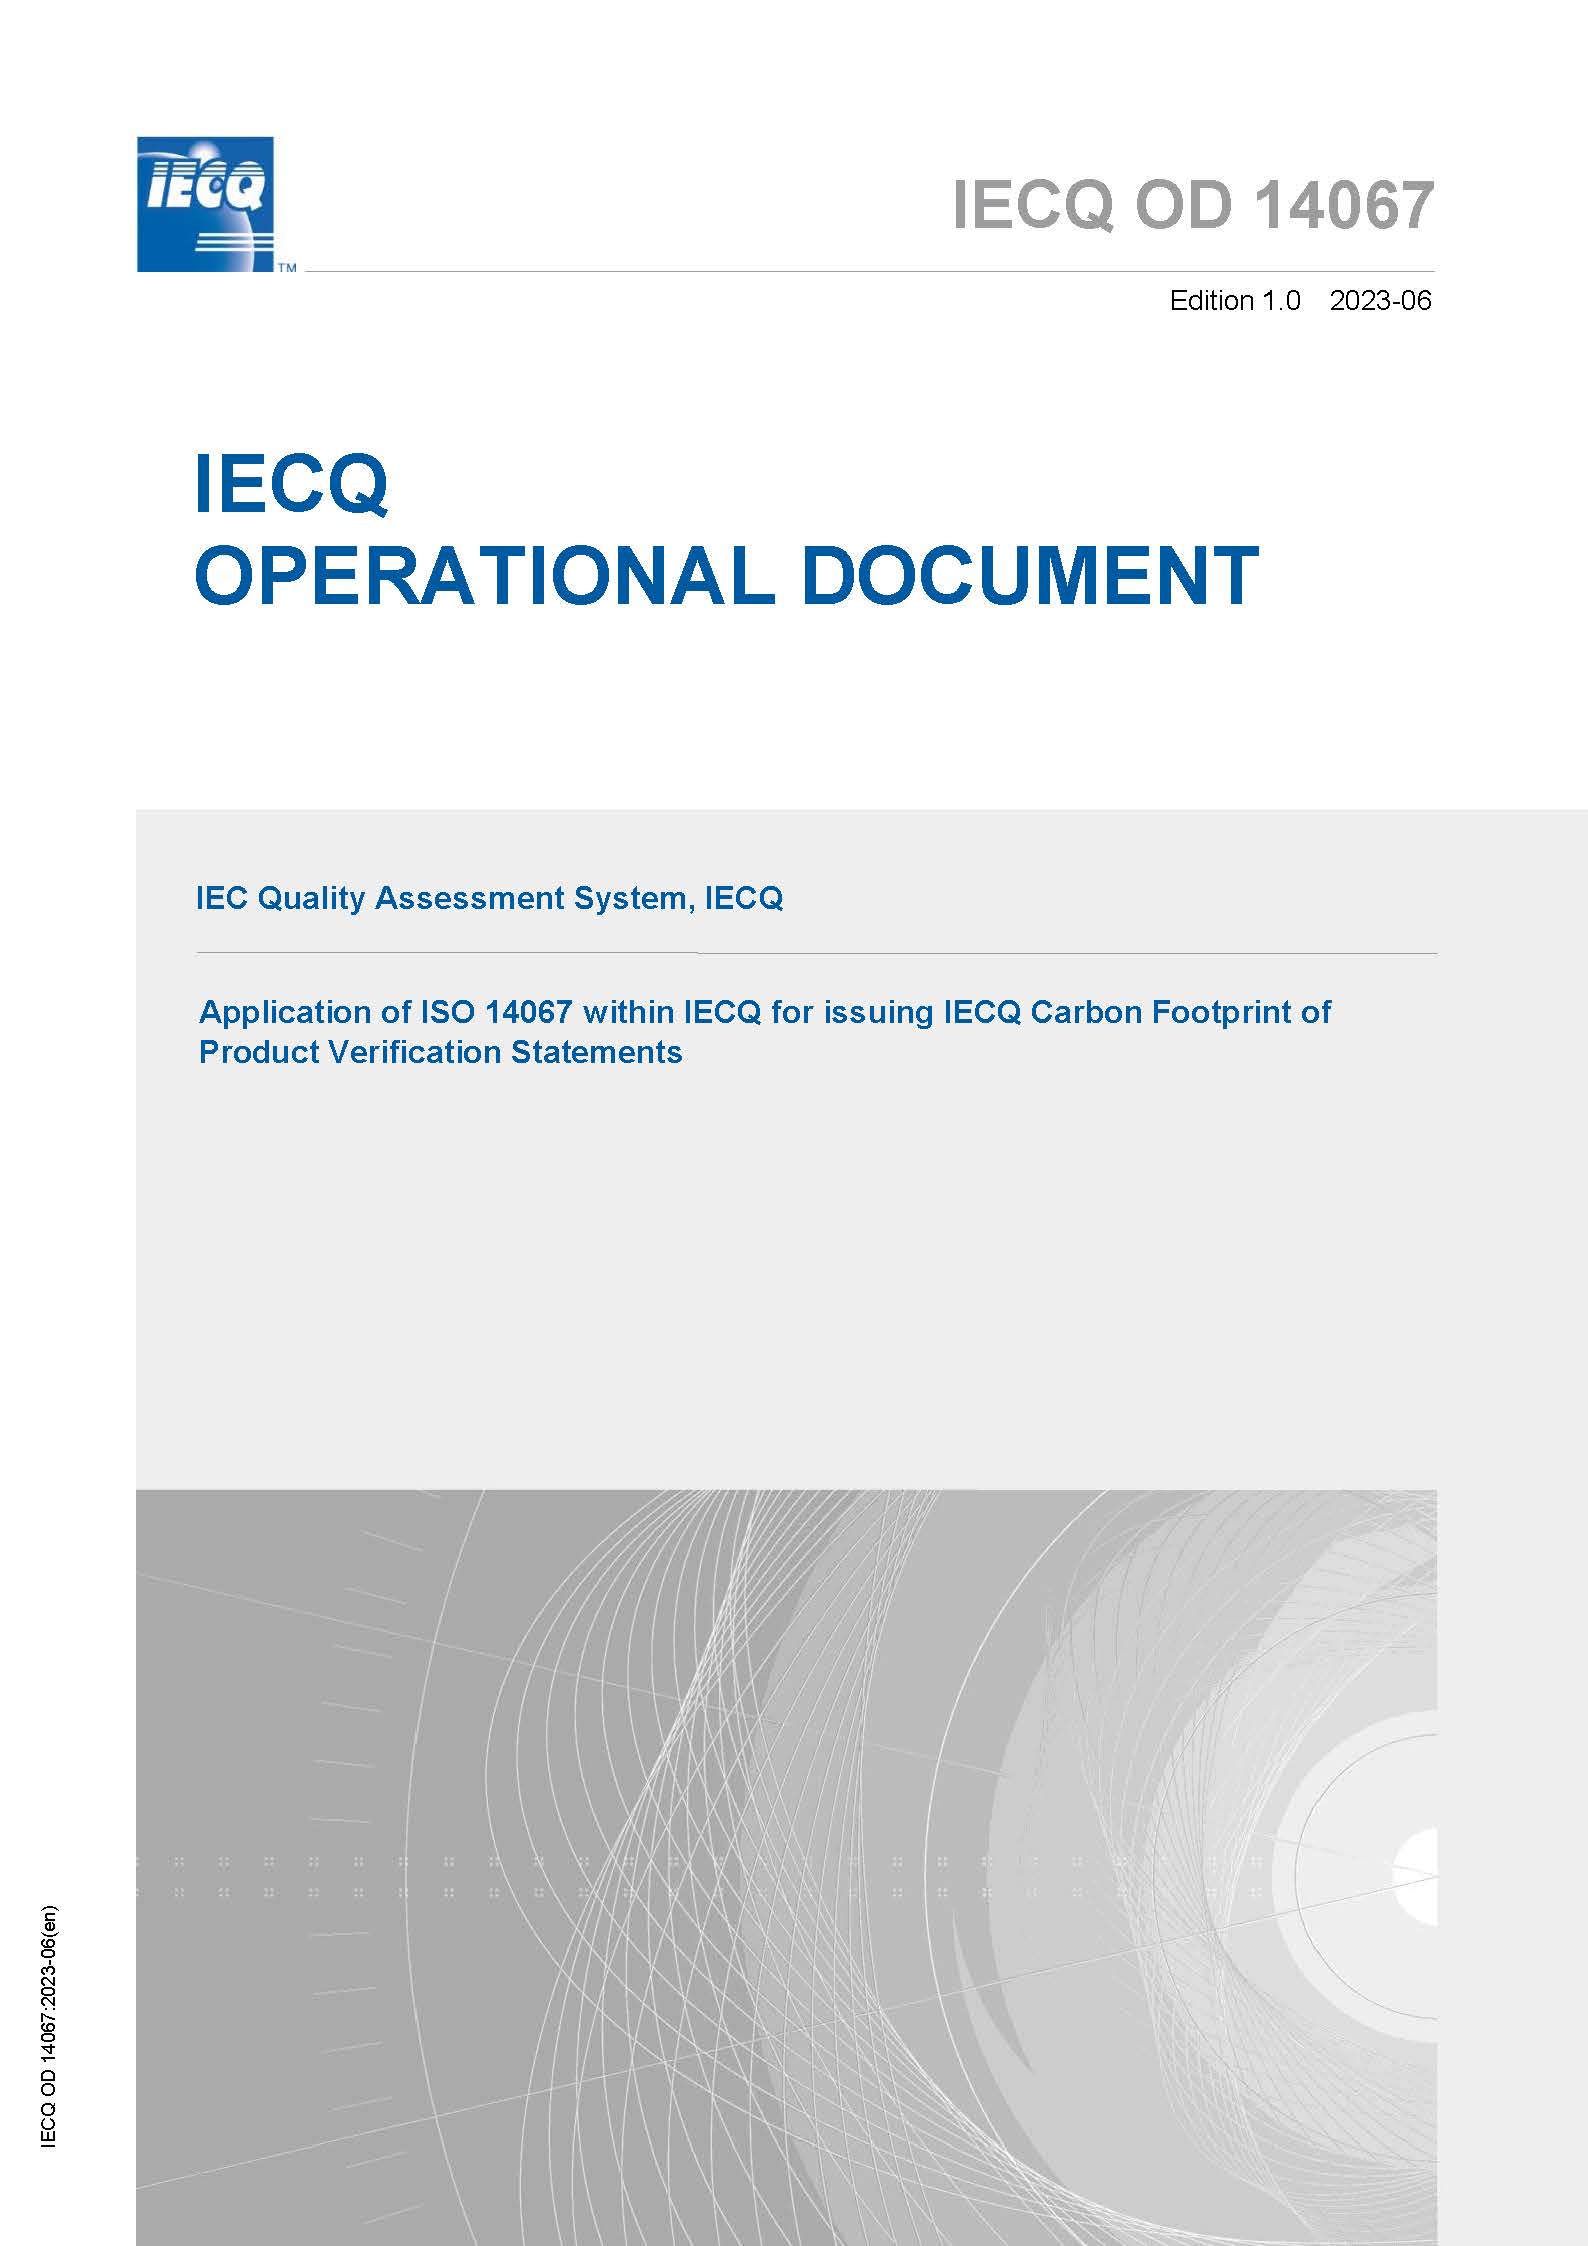 IECQ Rules of Procedure - Part 3-1: IECQ Approved Component Products, Related Materials & Assemblies Scheme, IECQ Approved Component - Technology Certification (IECQ AC-TC)